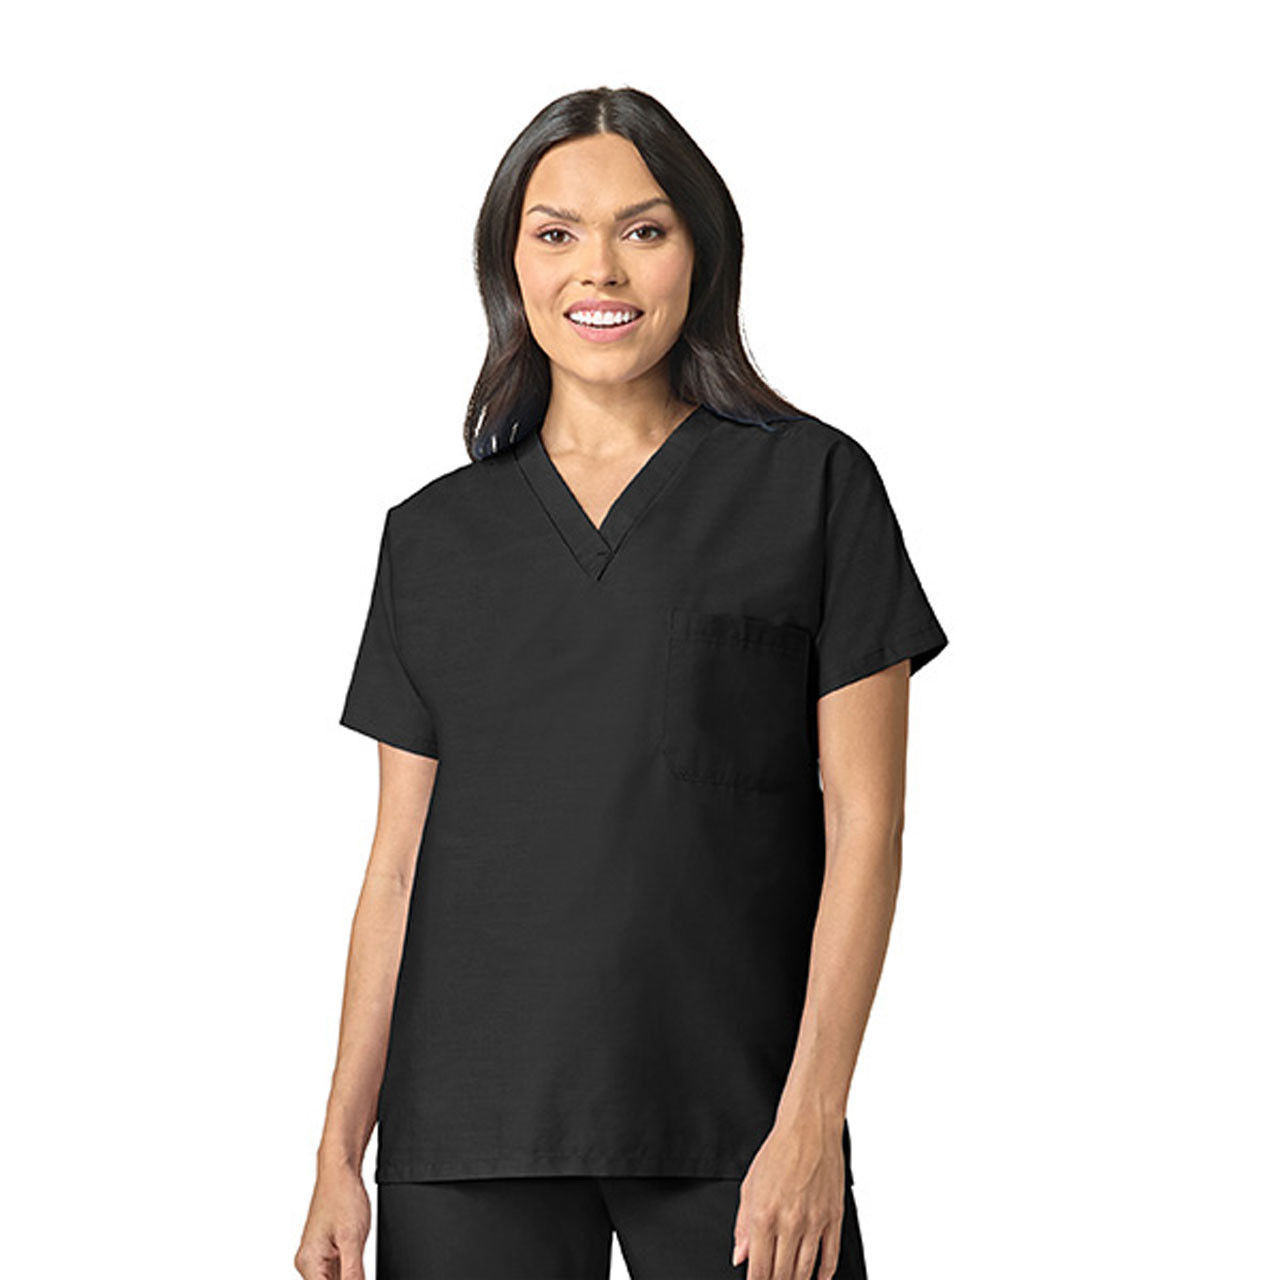 Can I store items in the Black Scrub Tops?